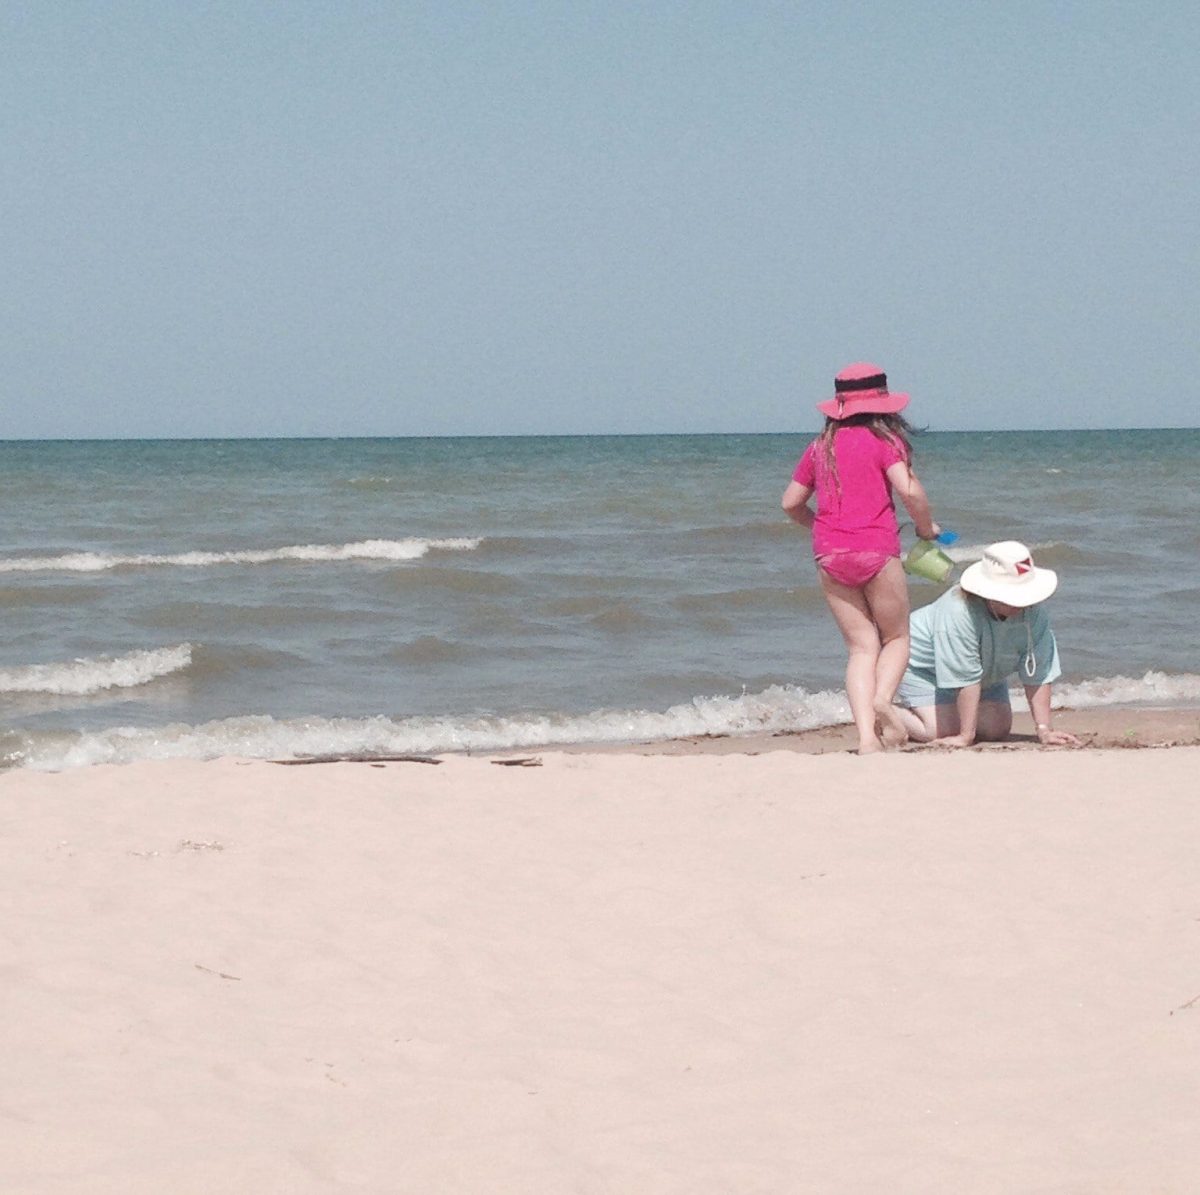 Lake Michigan Beach Access Case – Supreme Court Won’t Consider Pleas Of Lake Michigan Shoreline Owners Who Wanted to Prevent Use